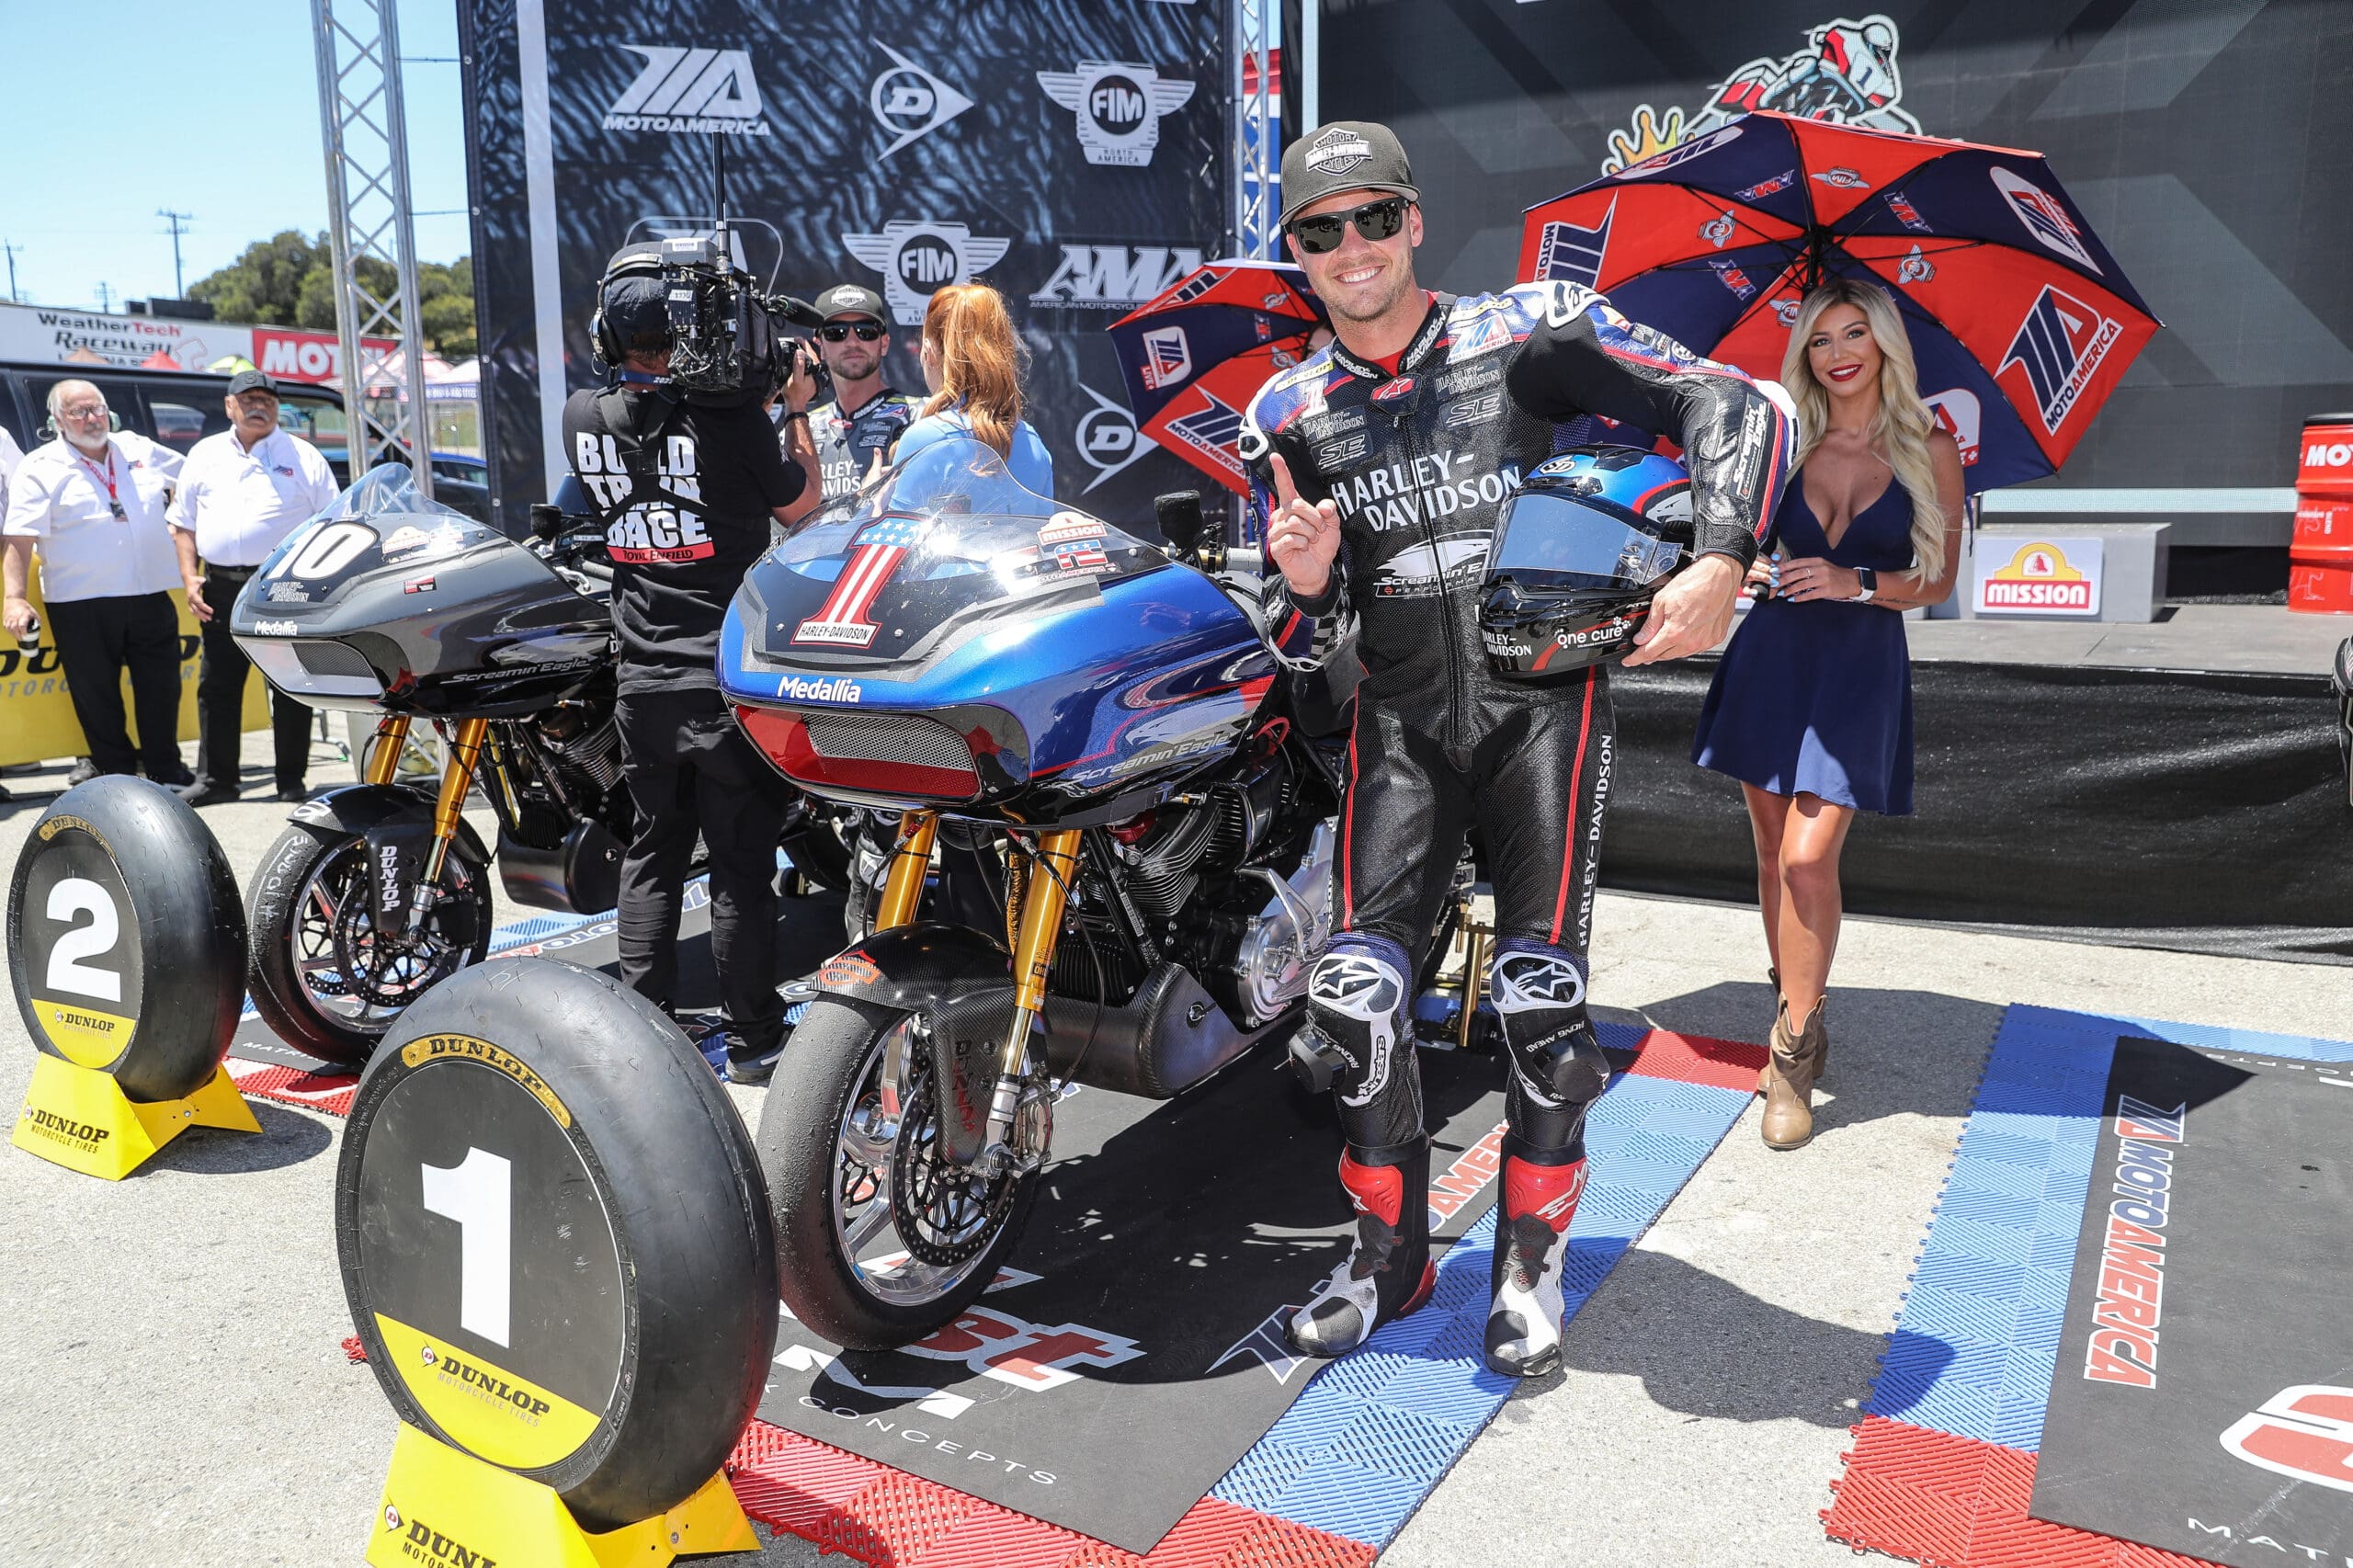 This past Sunday saw Kyle Wyman and brother Travis lead a sweep of successes for Harley-Davison. All media sourced from Harley-Davidson's press release.